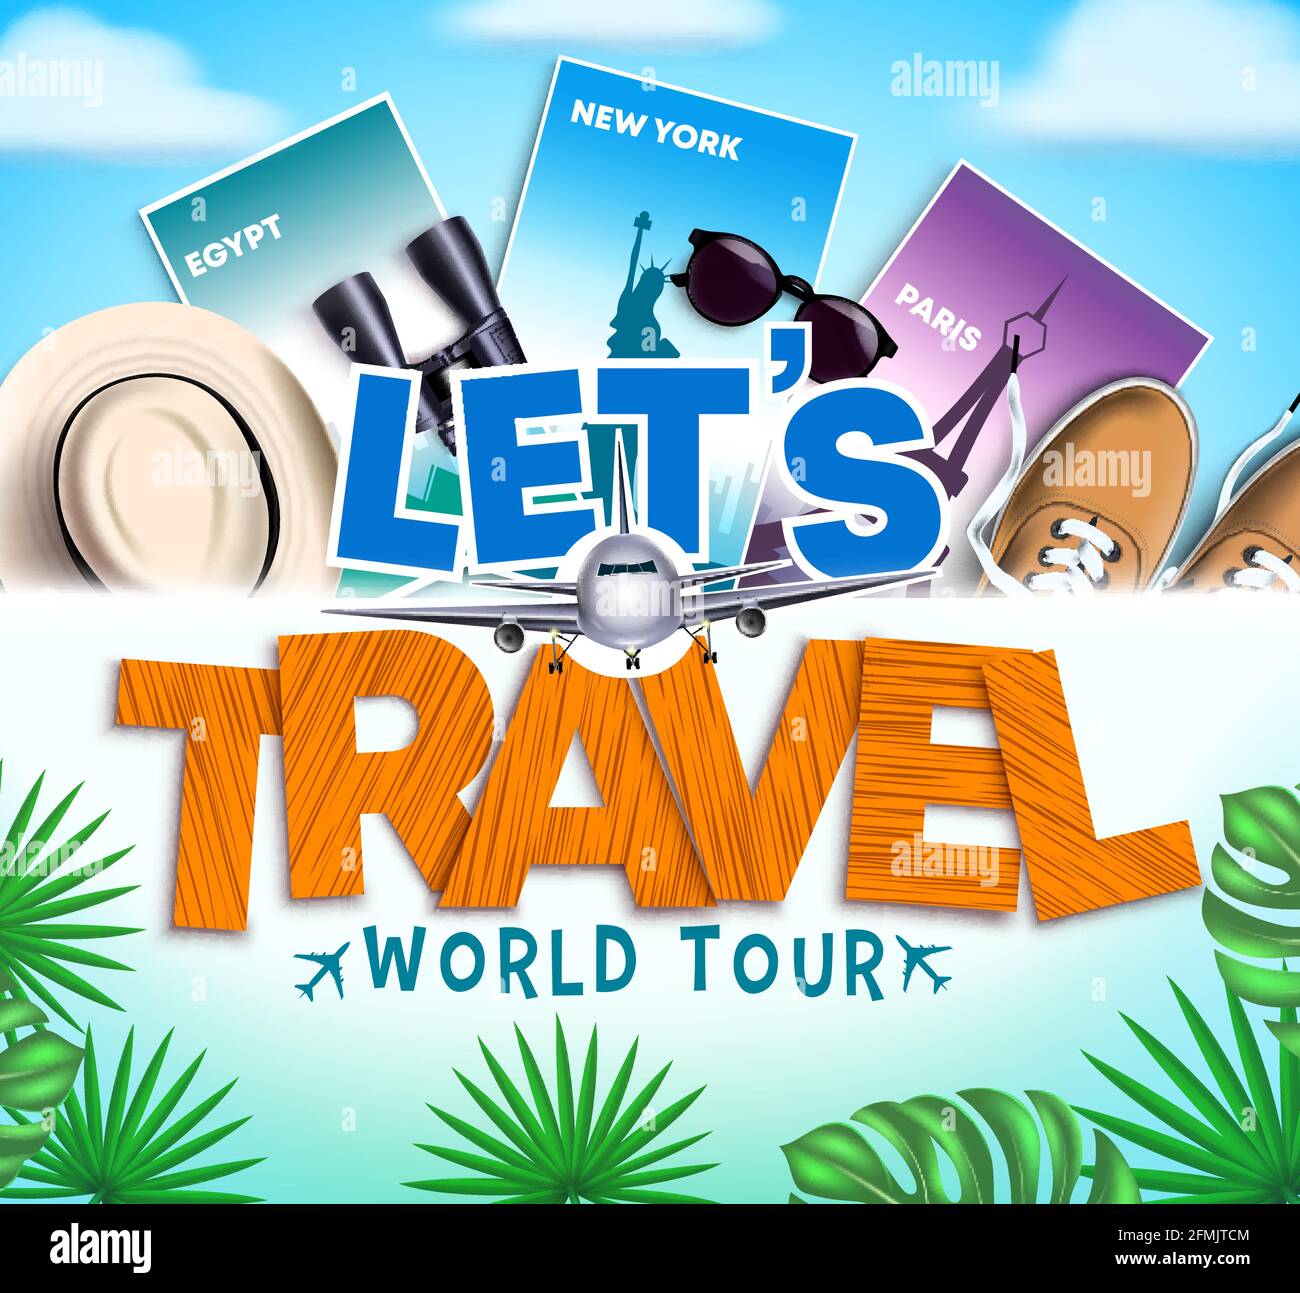 Let's travel vector design. Let's travel world tour text in paper cut with travelling 3d elements like hat, sneakers and country destination card. Stock Vector